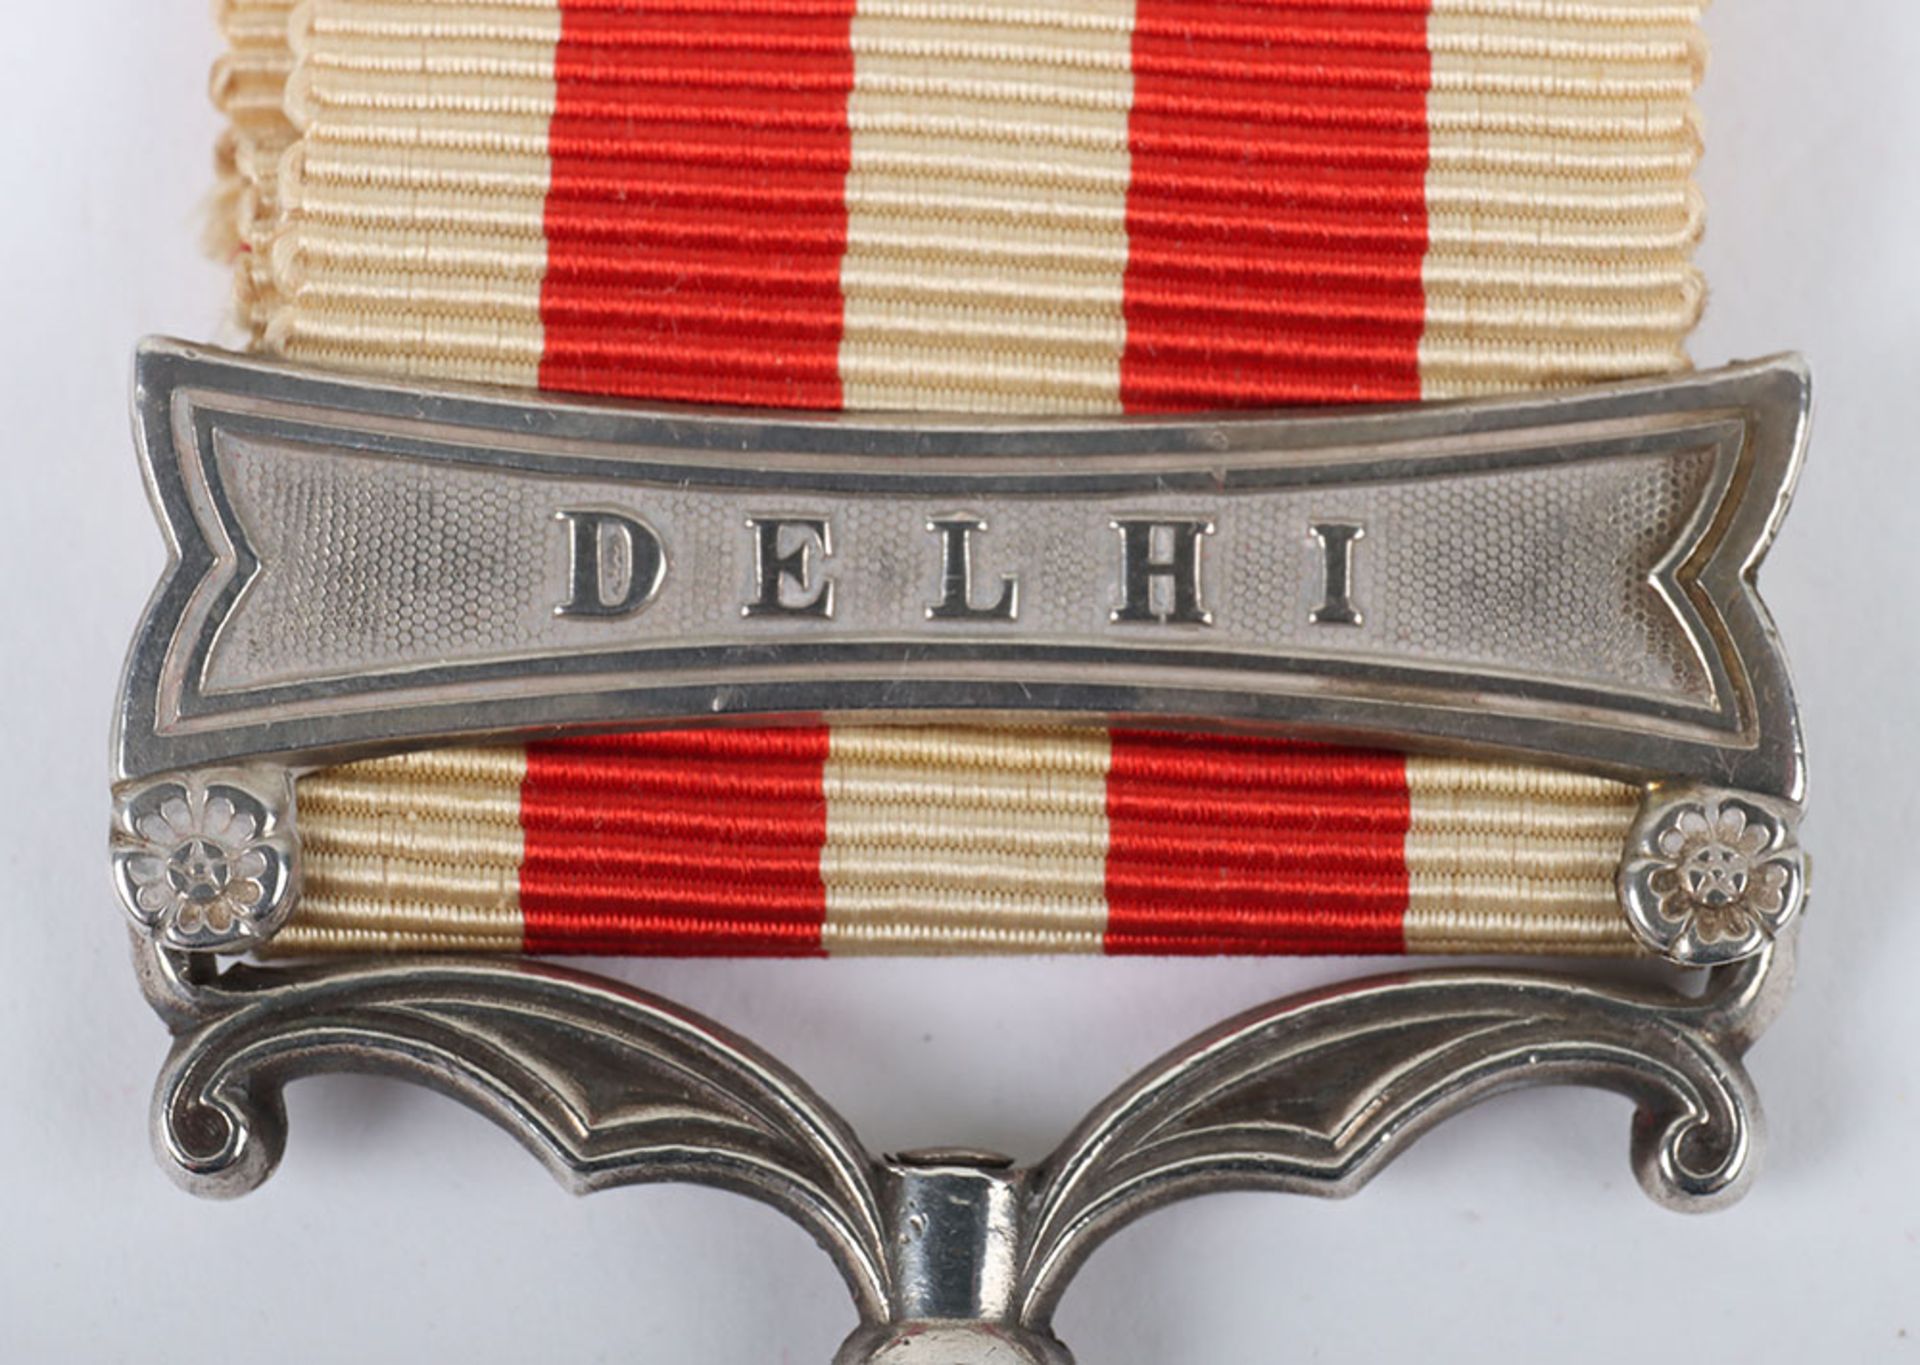 Indian Mutiny Medal Awarded to a Corporal of the 8th (Kings) Regiment Who Was Killed in Action Durin - Bild 5 aus 6